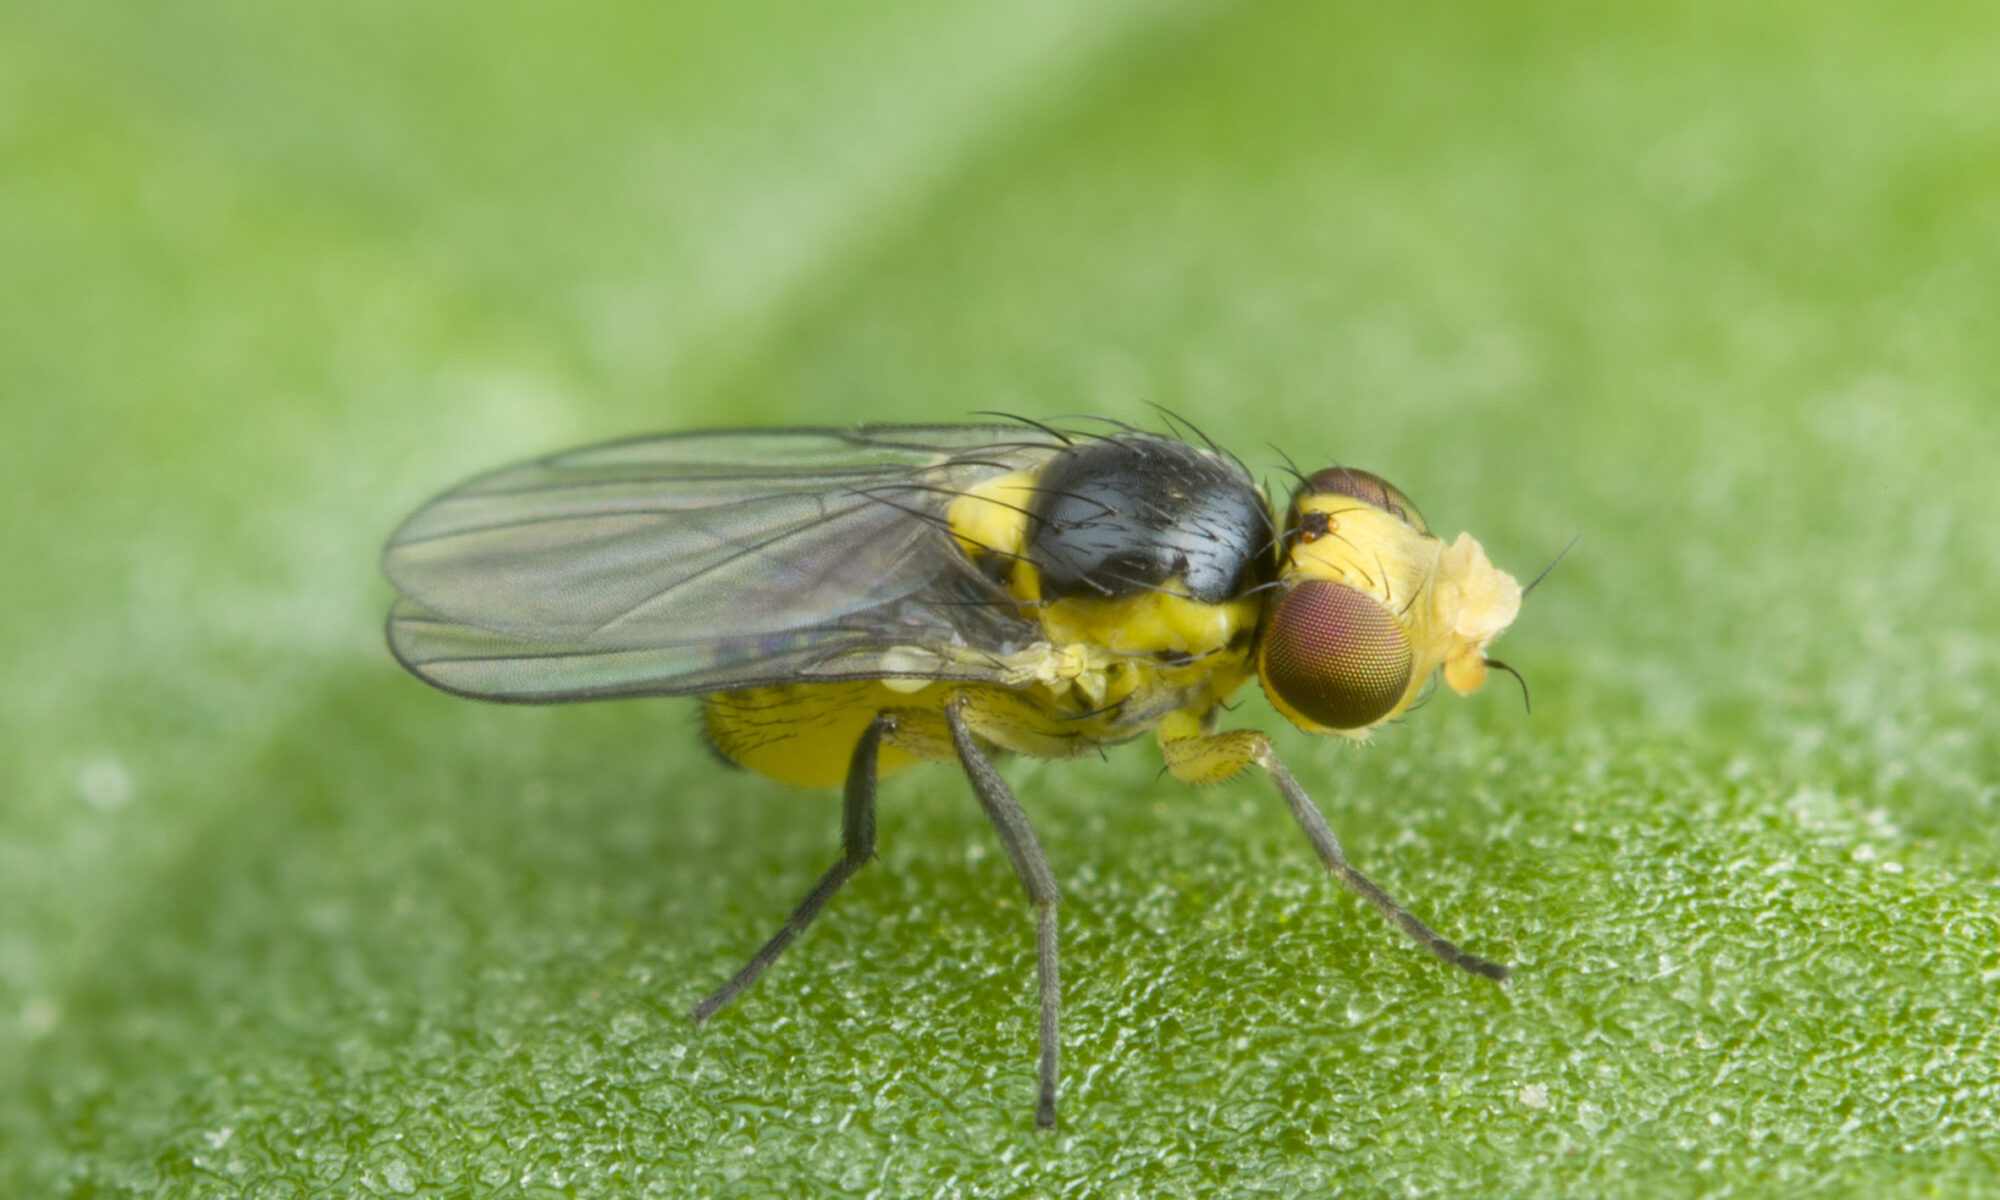 Liriomyza flies are about 2mm long and not easily seen